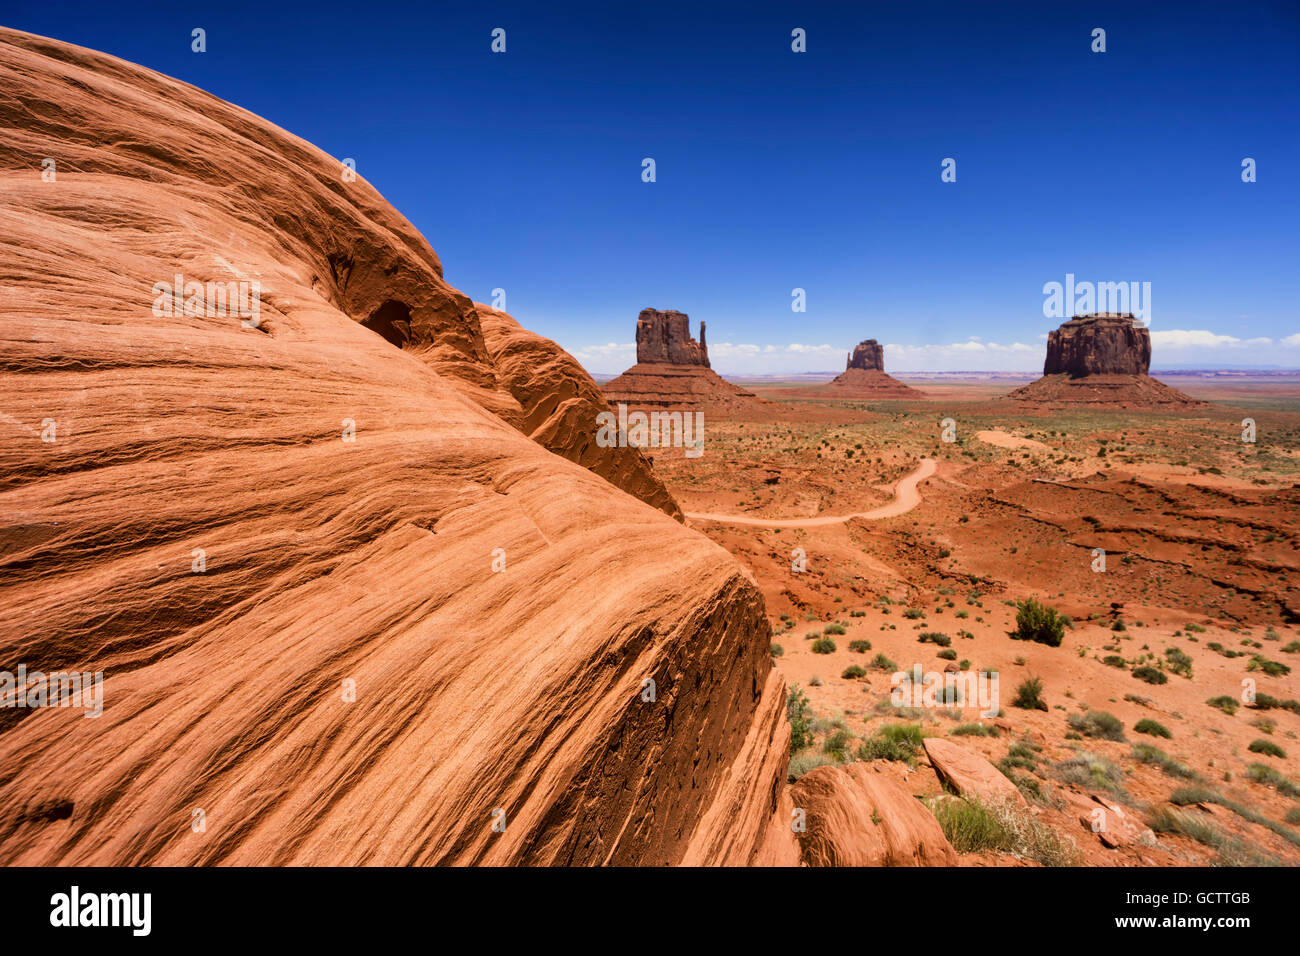 Big rock in Monument valley at the border of Utah and Arizona Stock Photo